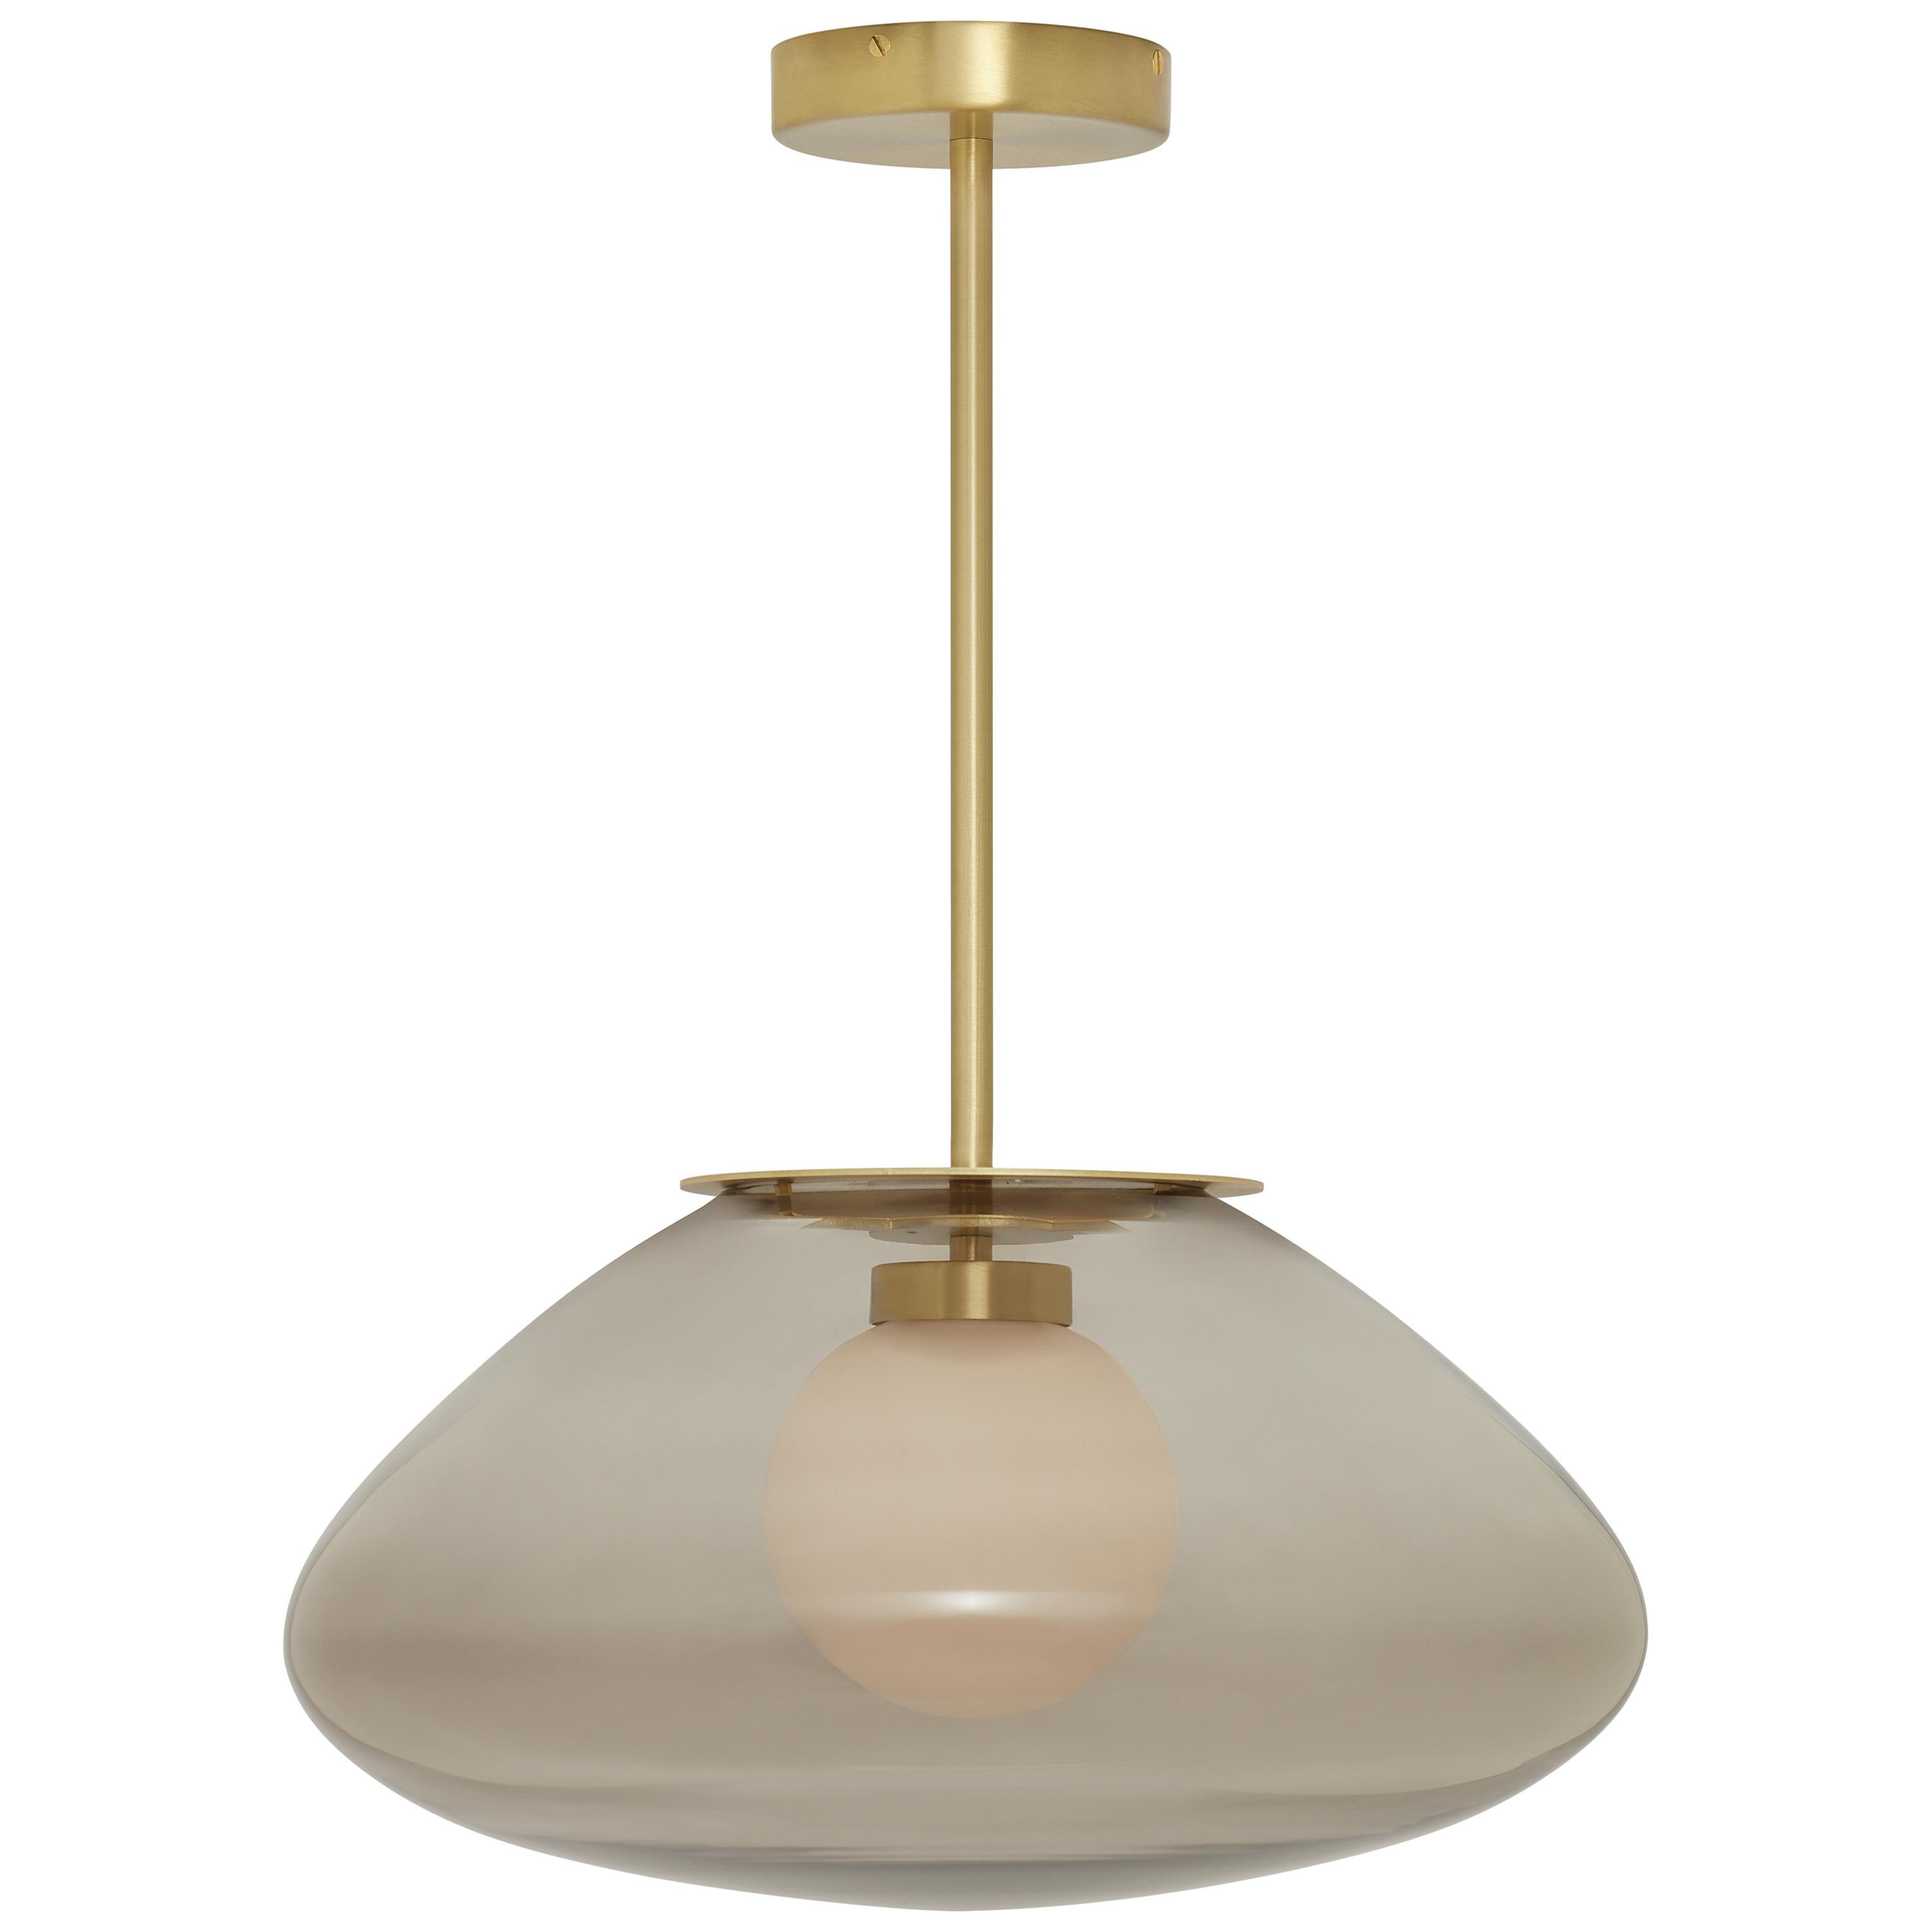 Petra small pendant by CTO Lighting
Materials: satin brass with smoked glass shade and hand shaped smoked glass inner shade
Also available in dark bronze with smoked glass shade and hand shaped smoked glass inner shade,
satin brass with smoked